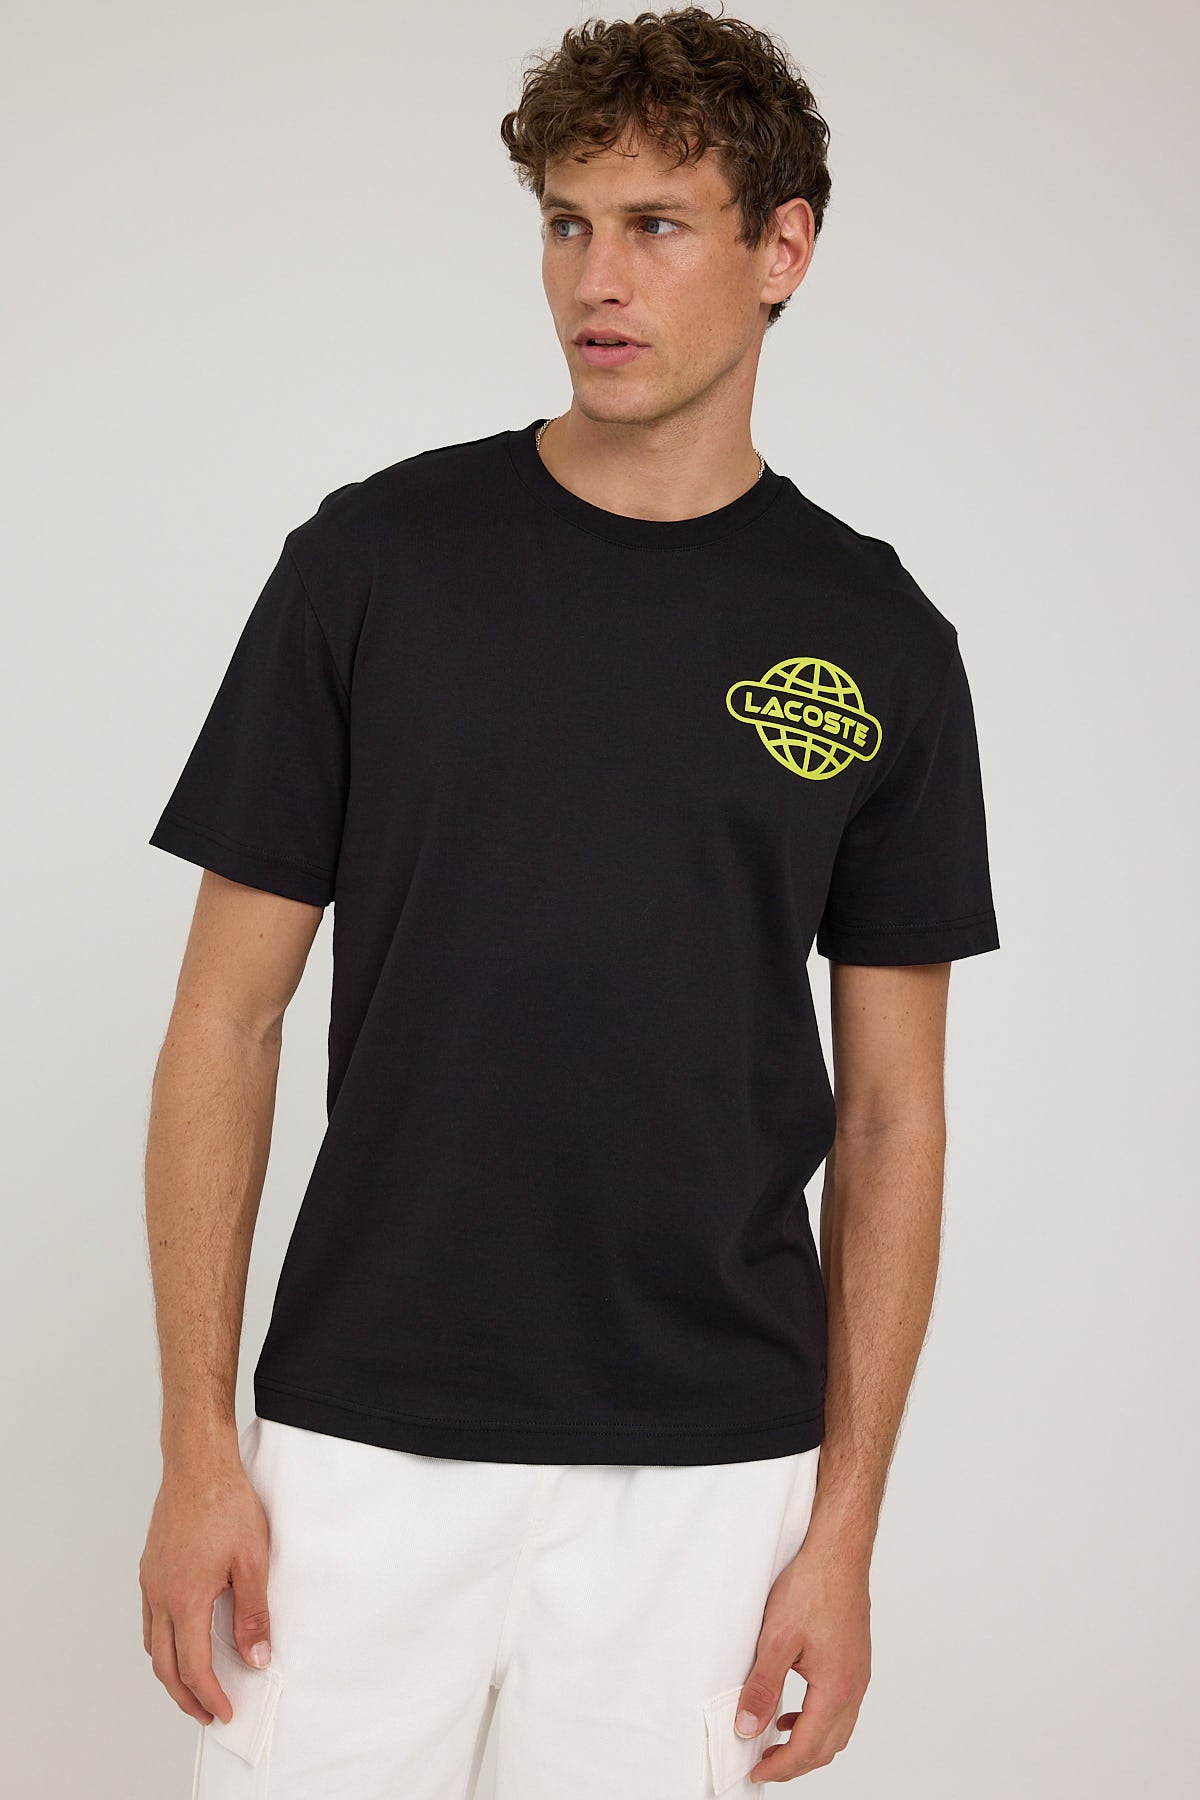 Lacoste Transitional Active Back Graphic T-Shirt Black